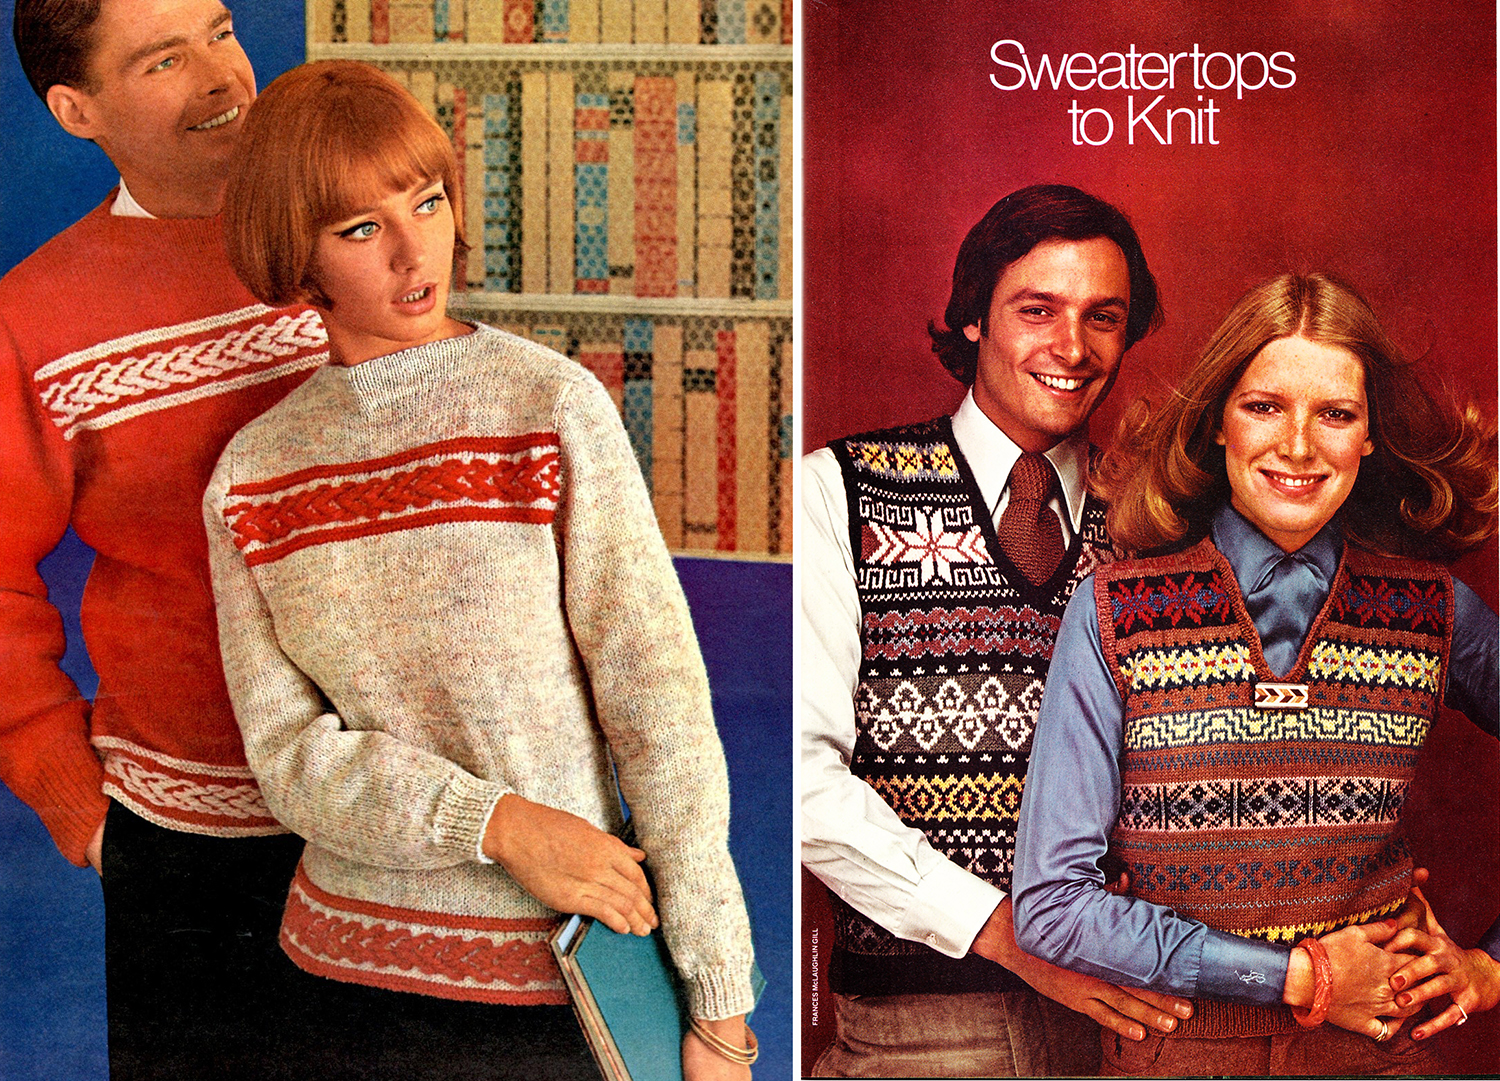 Sweaters from the 70s